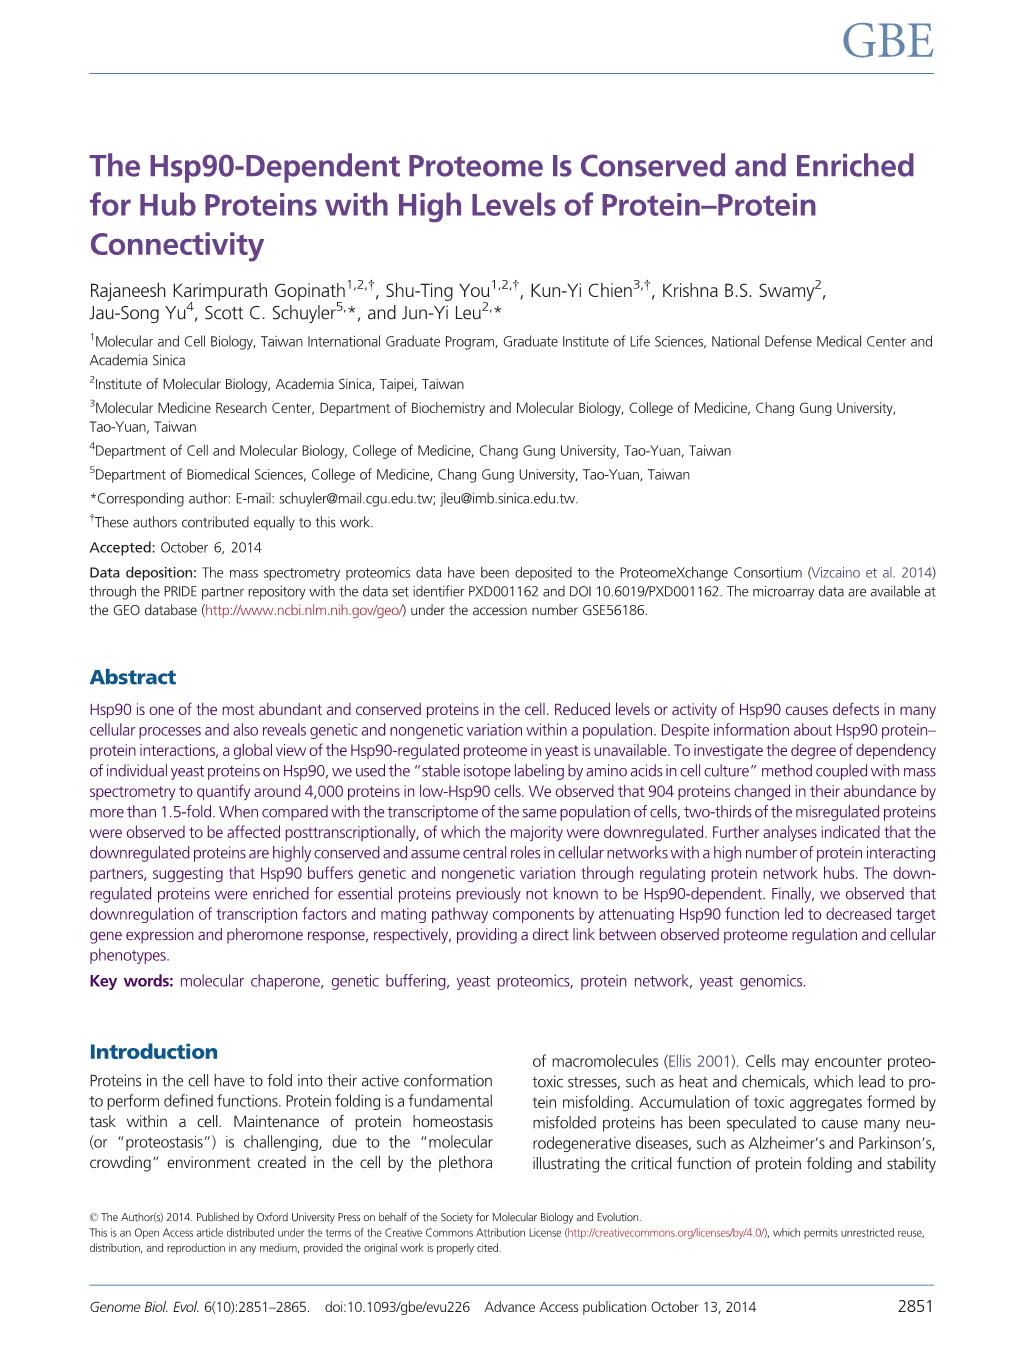 The Hsp90-Dependent Proteome Is Conserved and Enriched for Hub Proteins with High Levels of Protein–Protein Connectivity